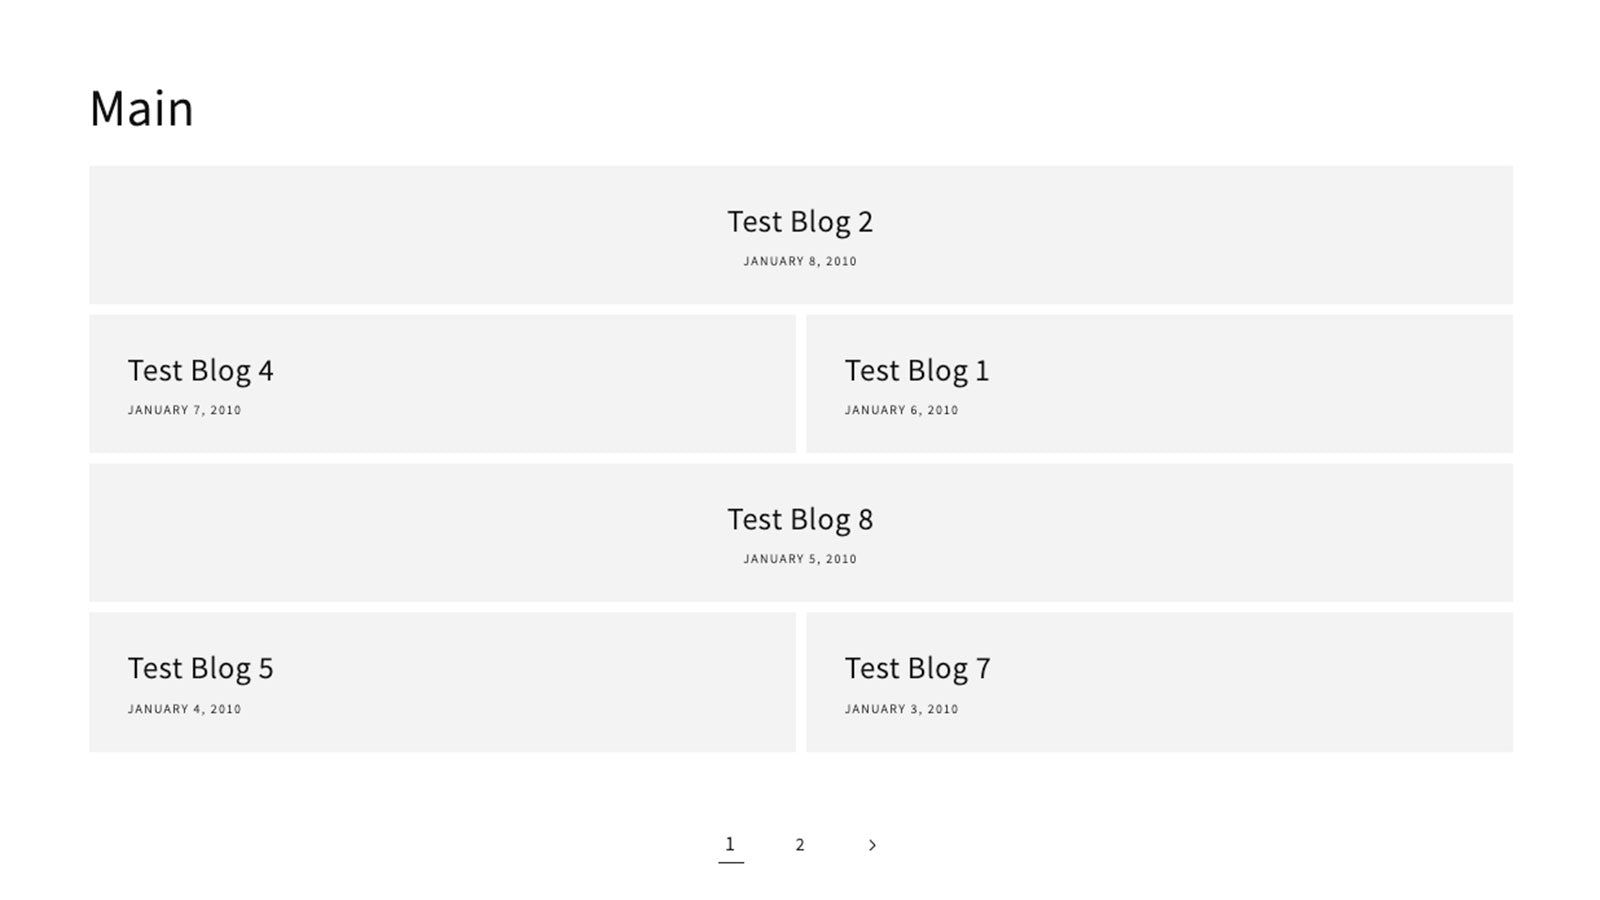 Order of blogs is reflected on the store front